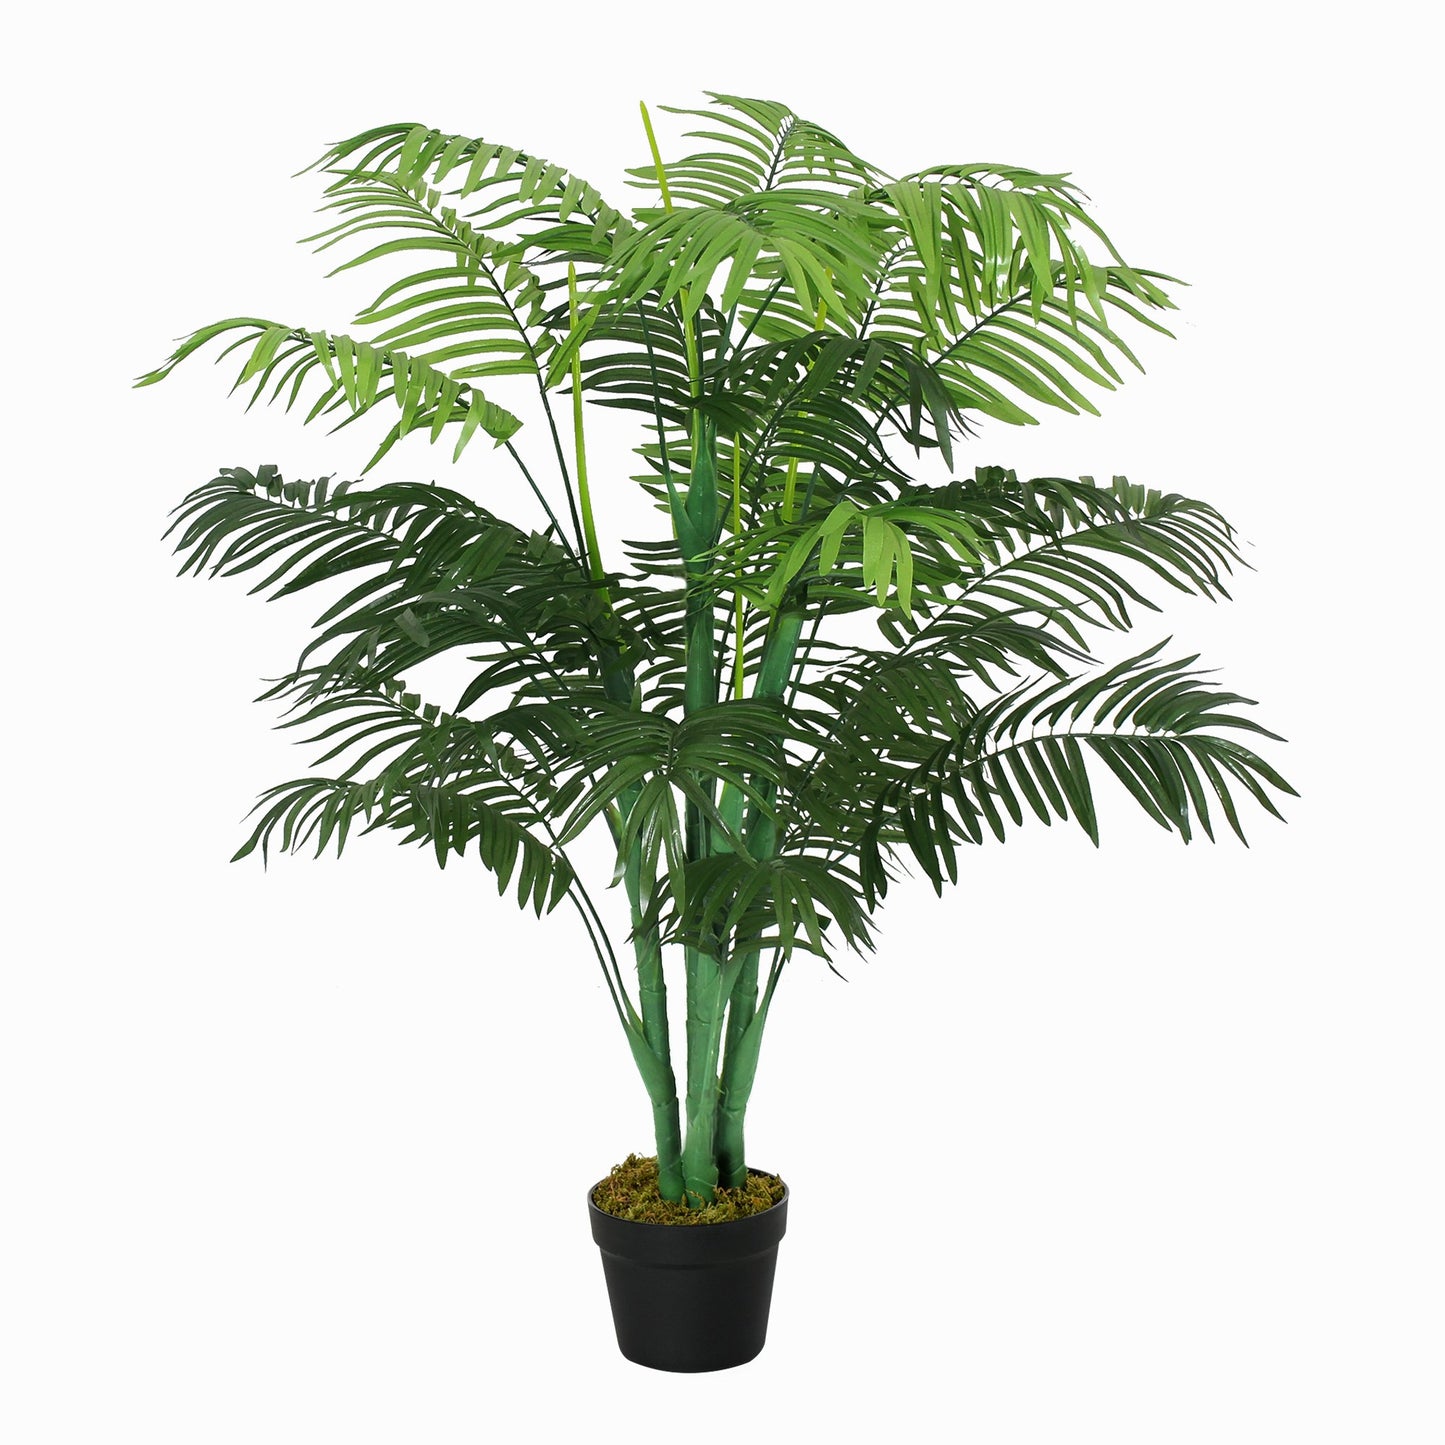 Outsunny 125cm/4FT Artificial Palm Plant Decorative Tree with 18 Leaves Nursery Pot Fake Plastic Indoor Outdoor Home Office Décor, Green